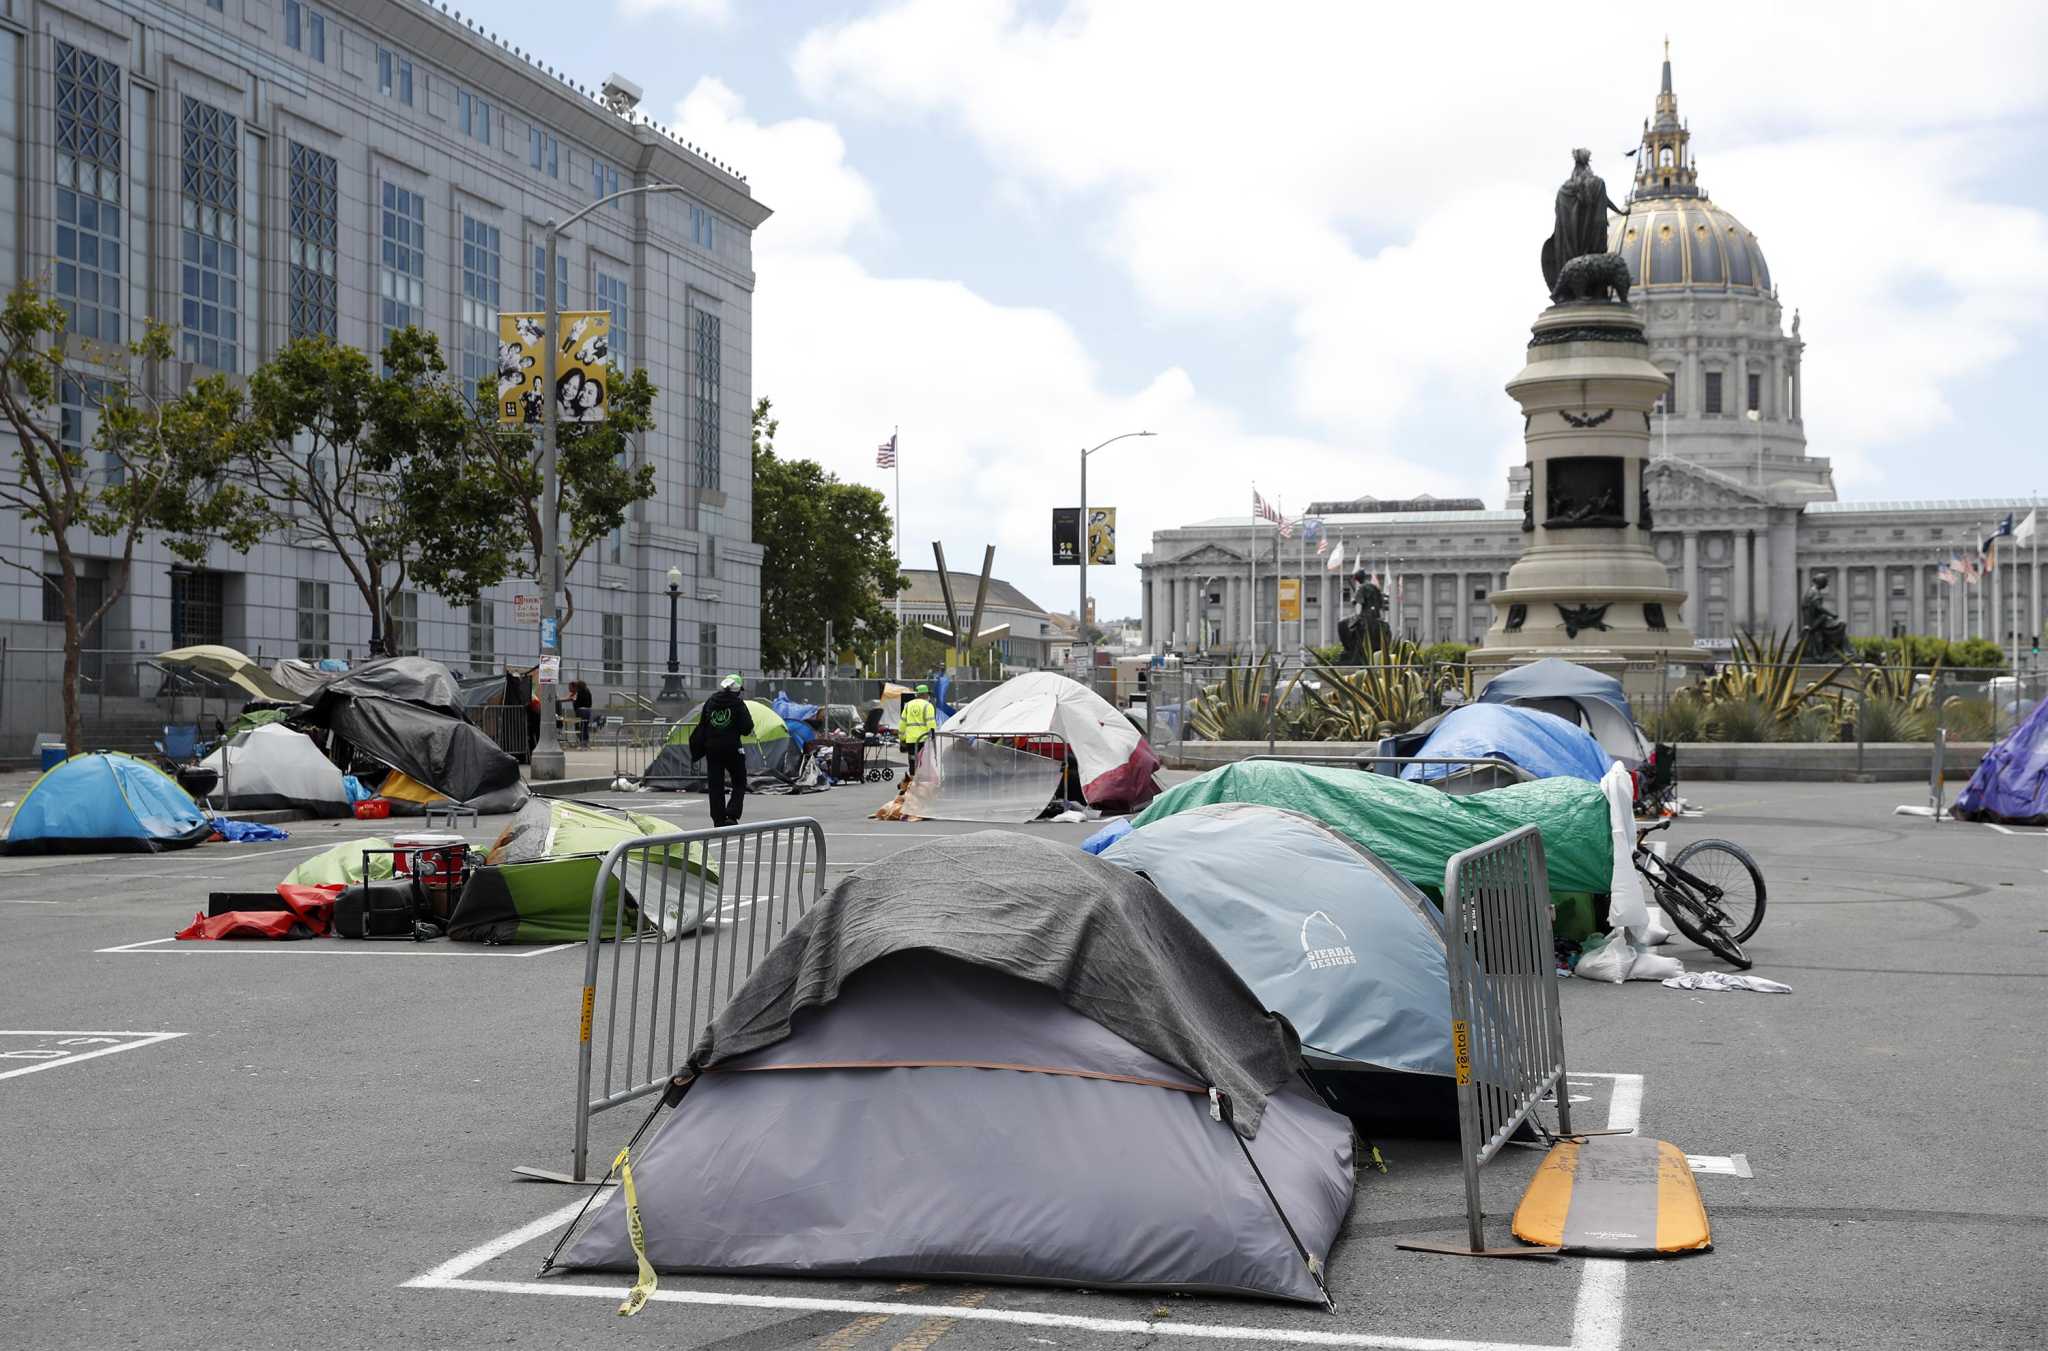 A city-sanctioned “safe sleeping village” on Fulton Street. The program currently costs $18.2 million for about 260 tents. The city create